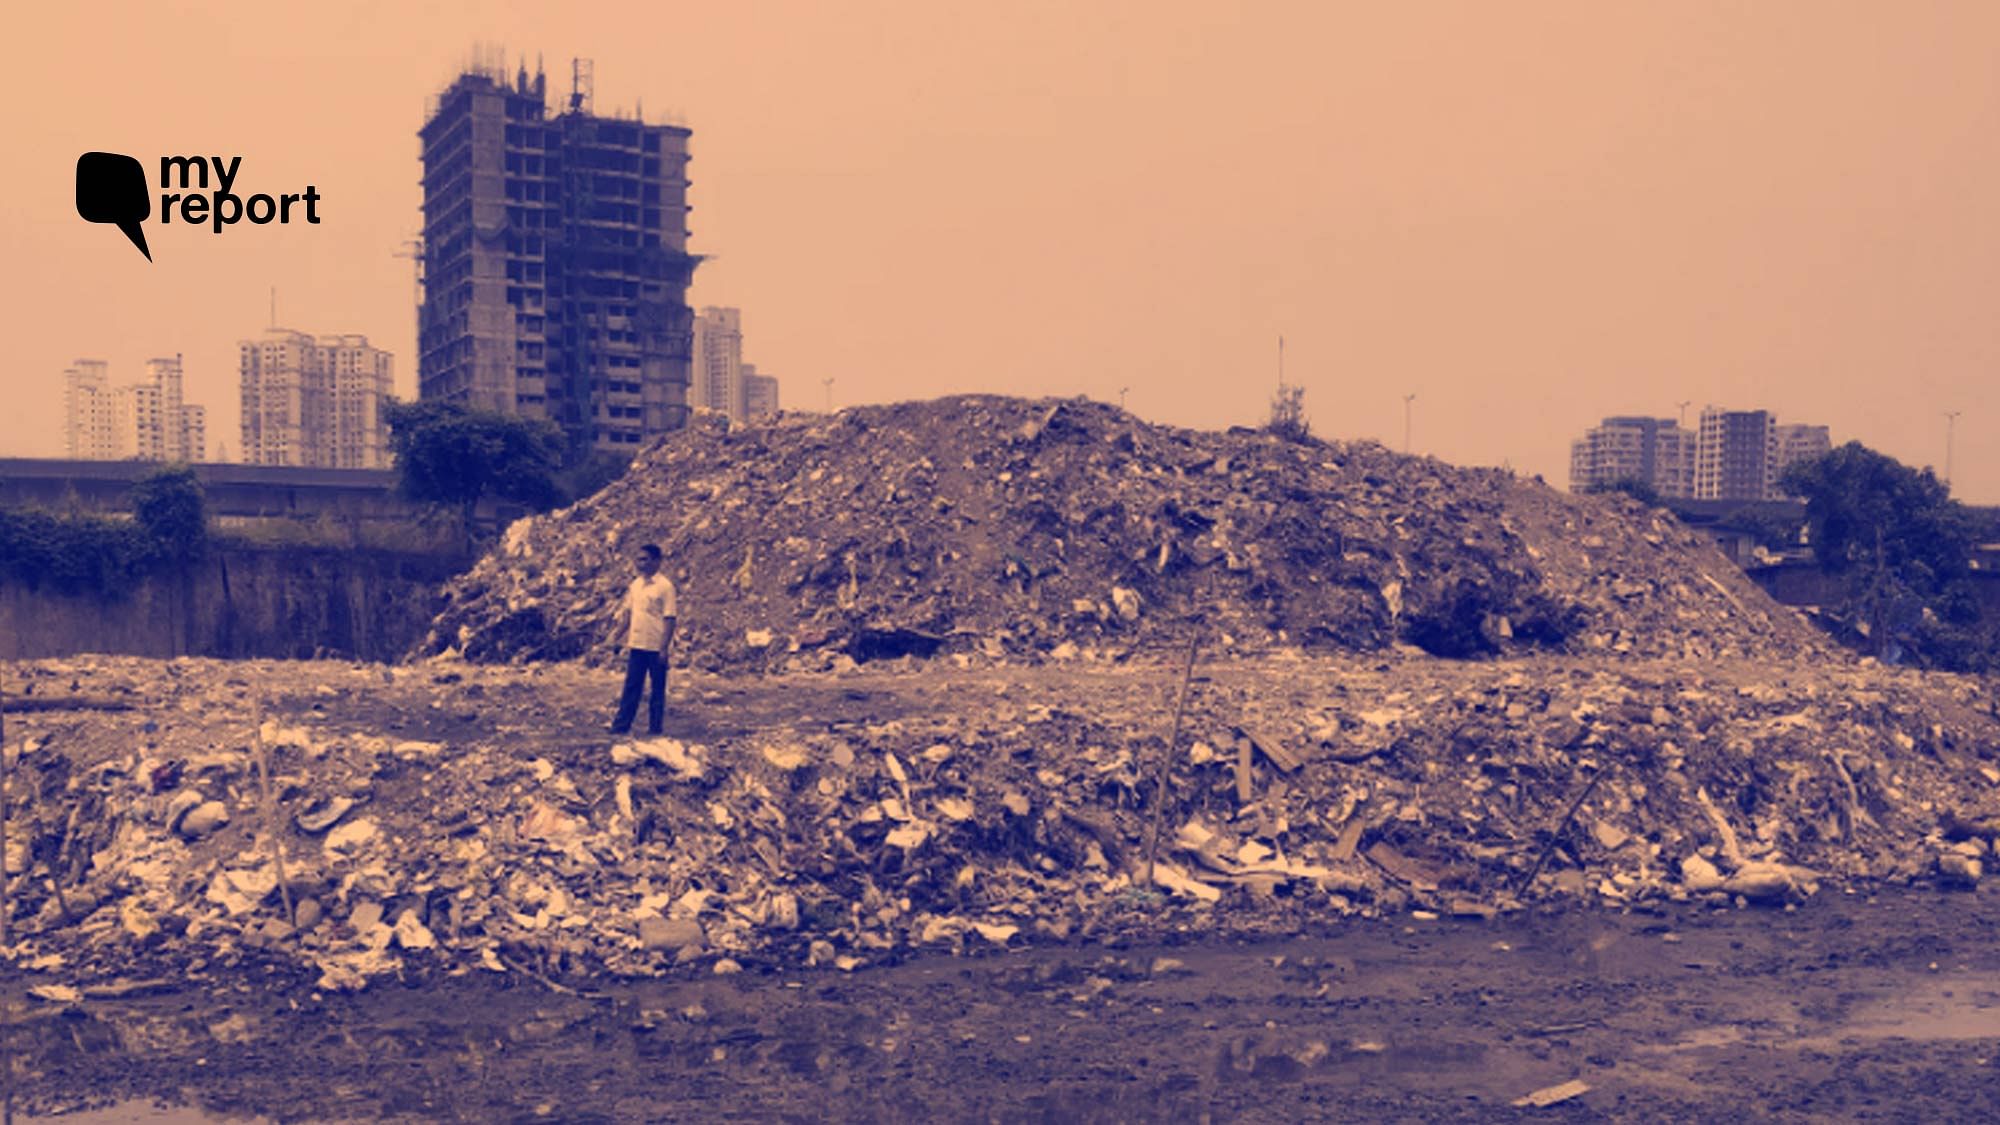 Salt pans have been littered with debris for nearly 2 years in Mumbai’s intertidal areas.